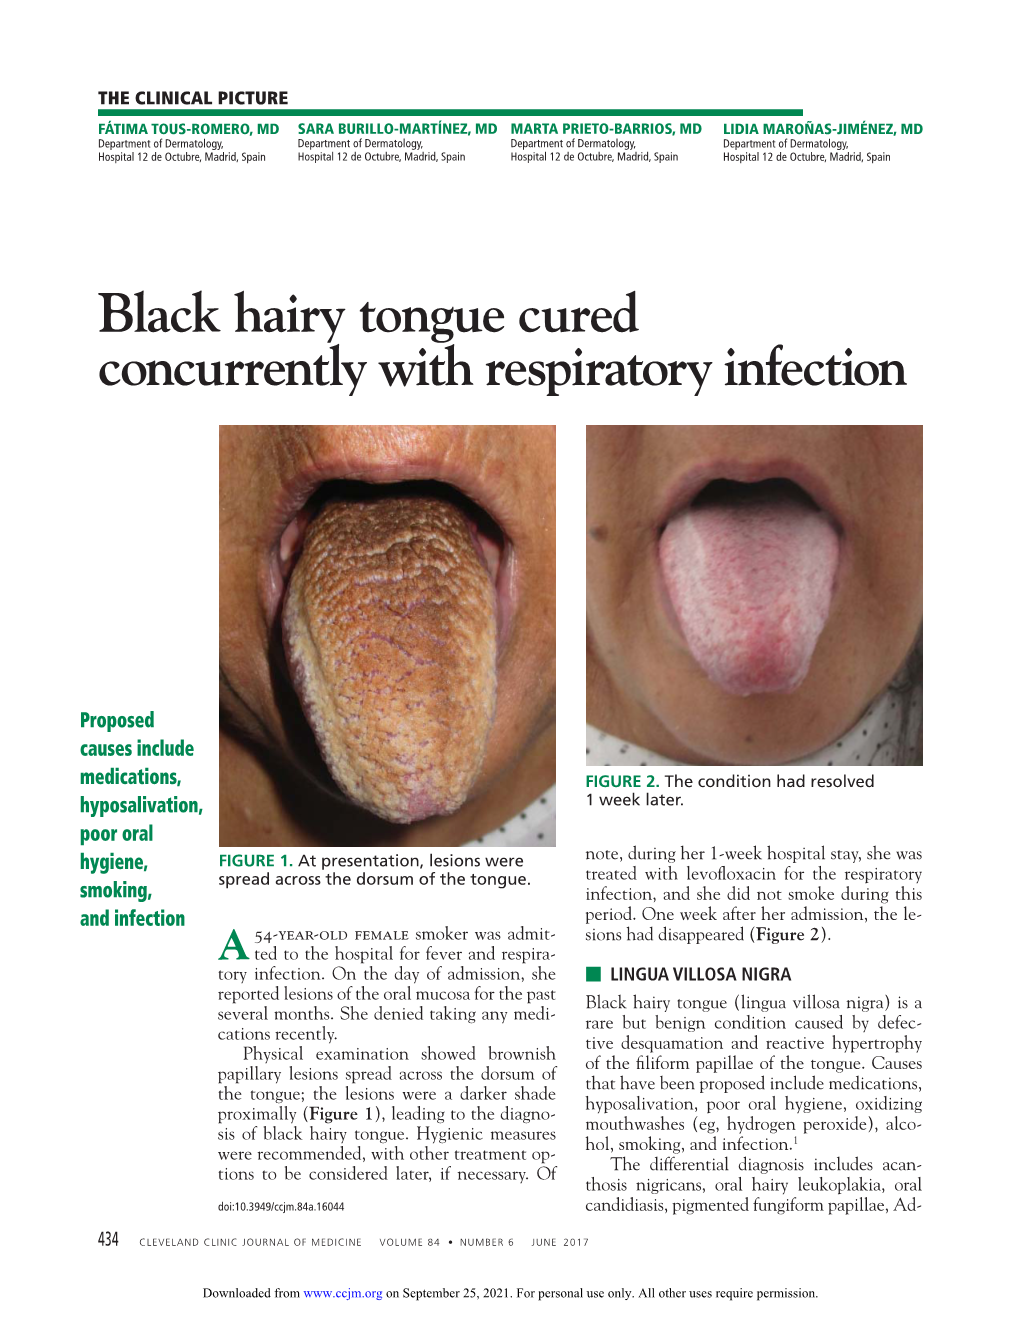 Black Hairy Tongue Cured Concurrently with Respiratory Infection